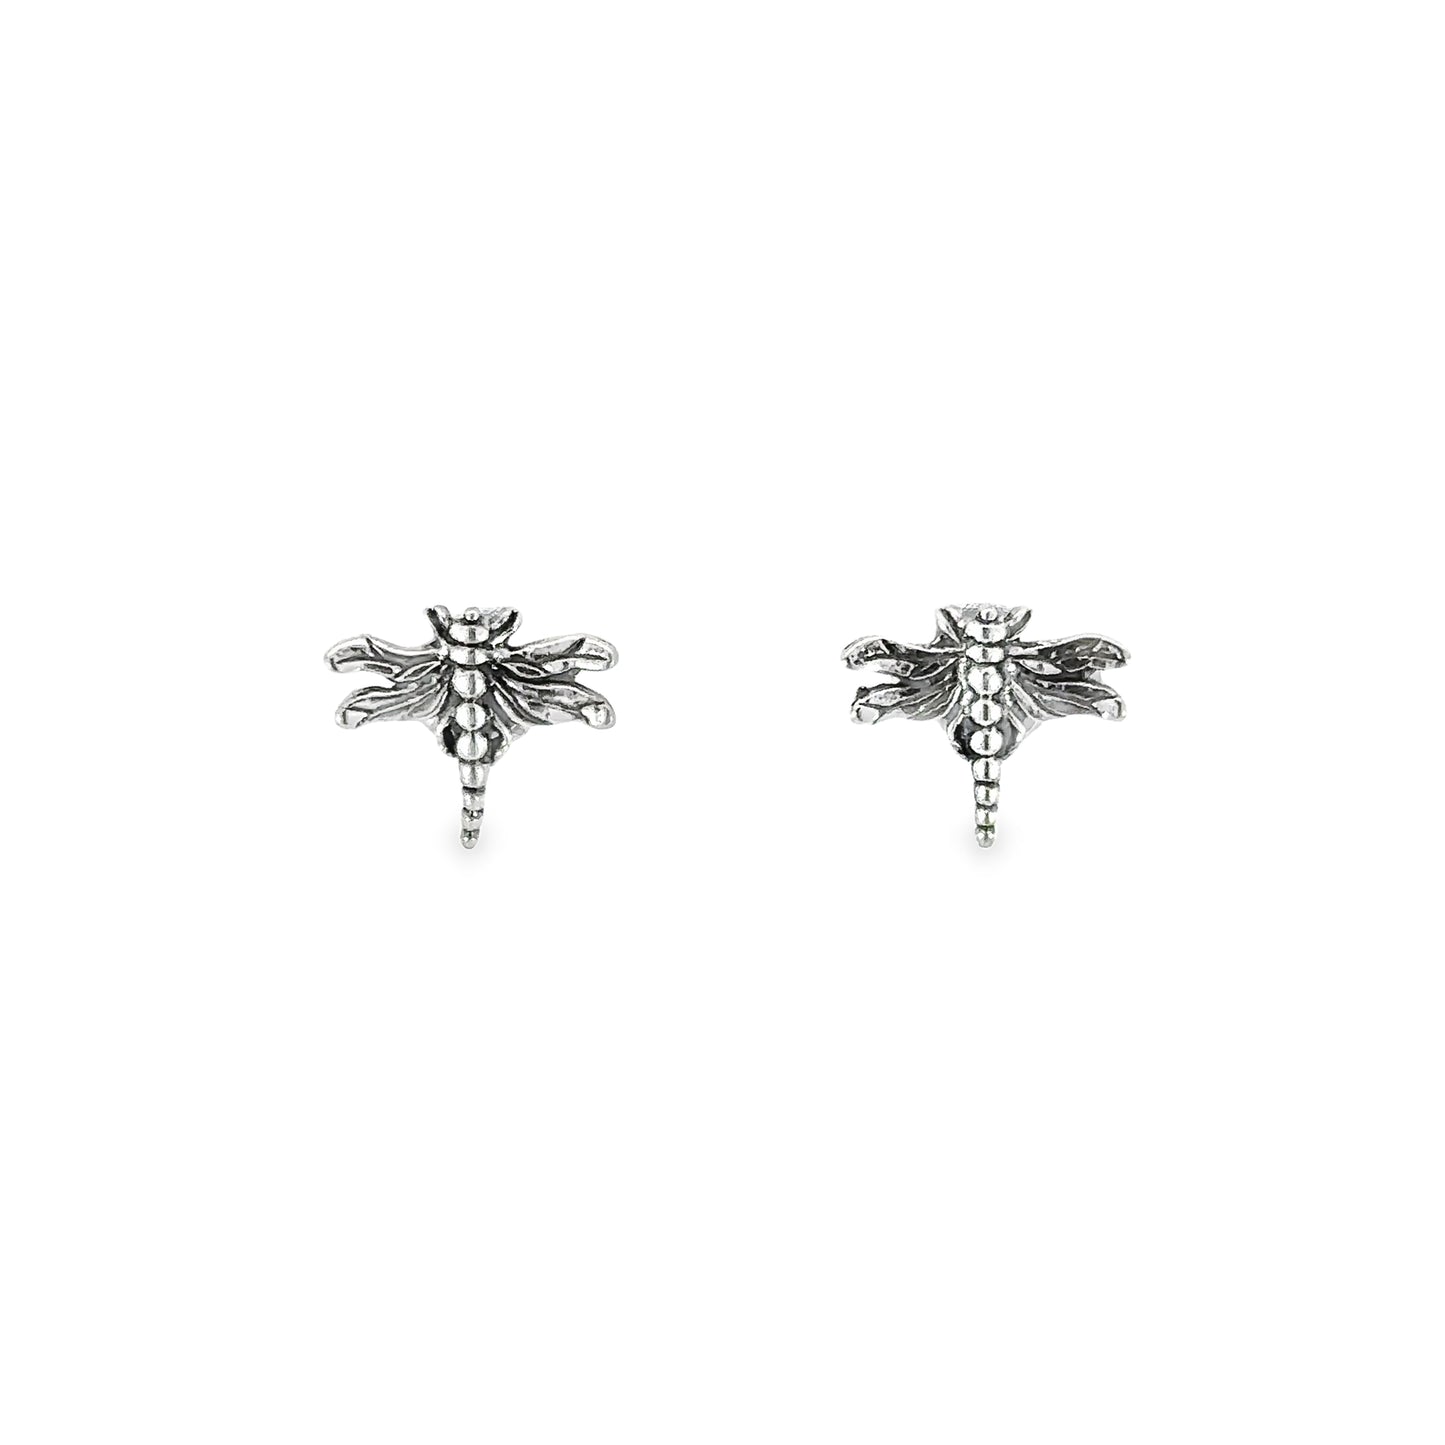 A pair of dragonfly stud earrings with detailed body on a white background.